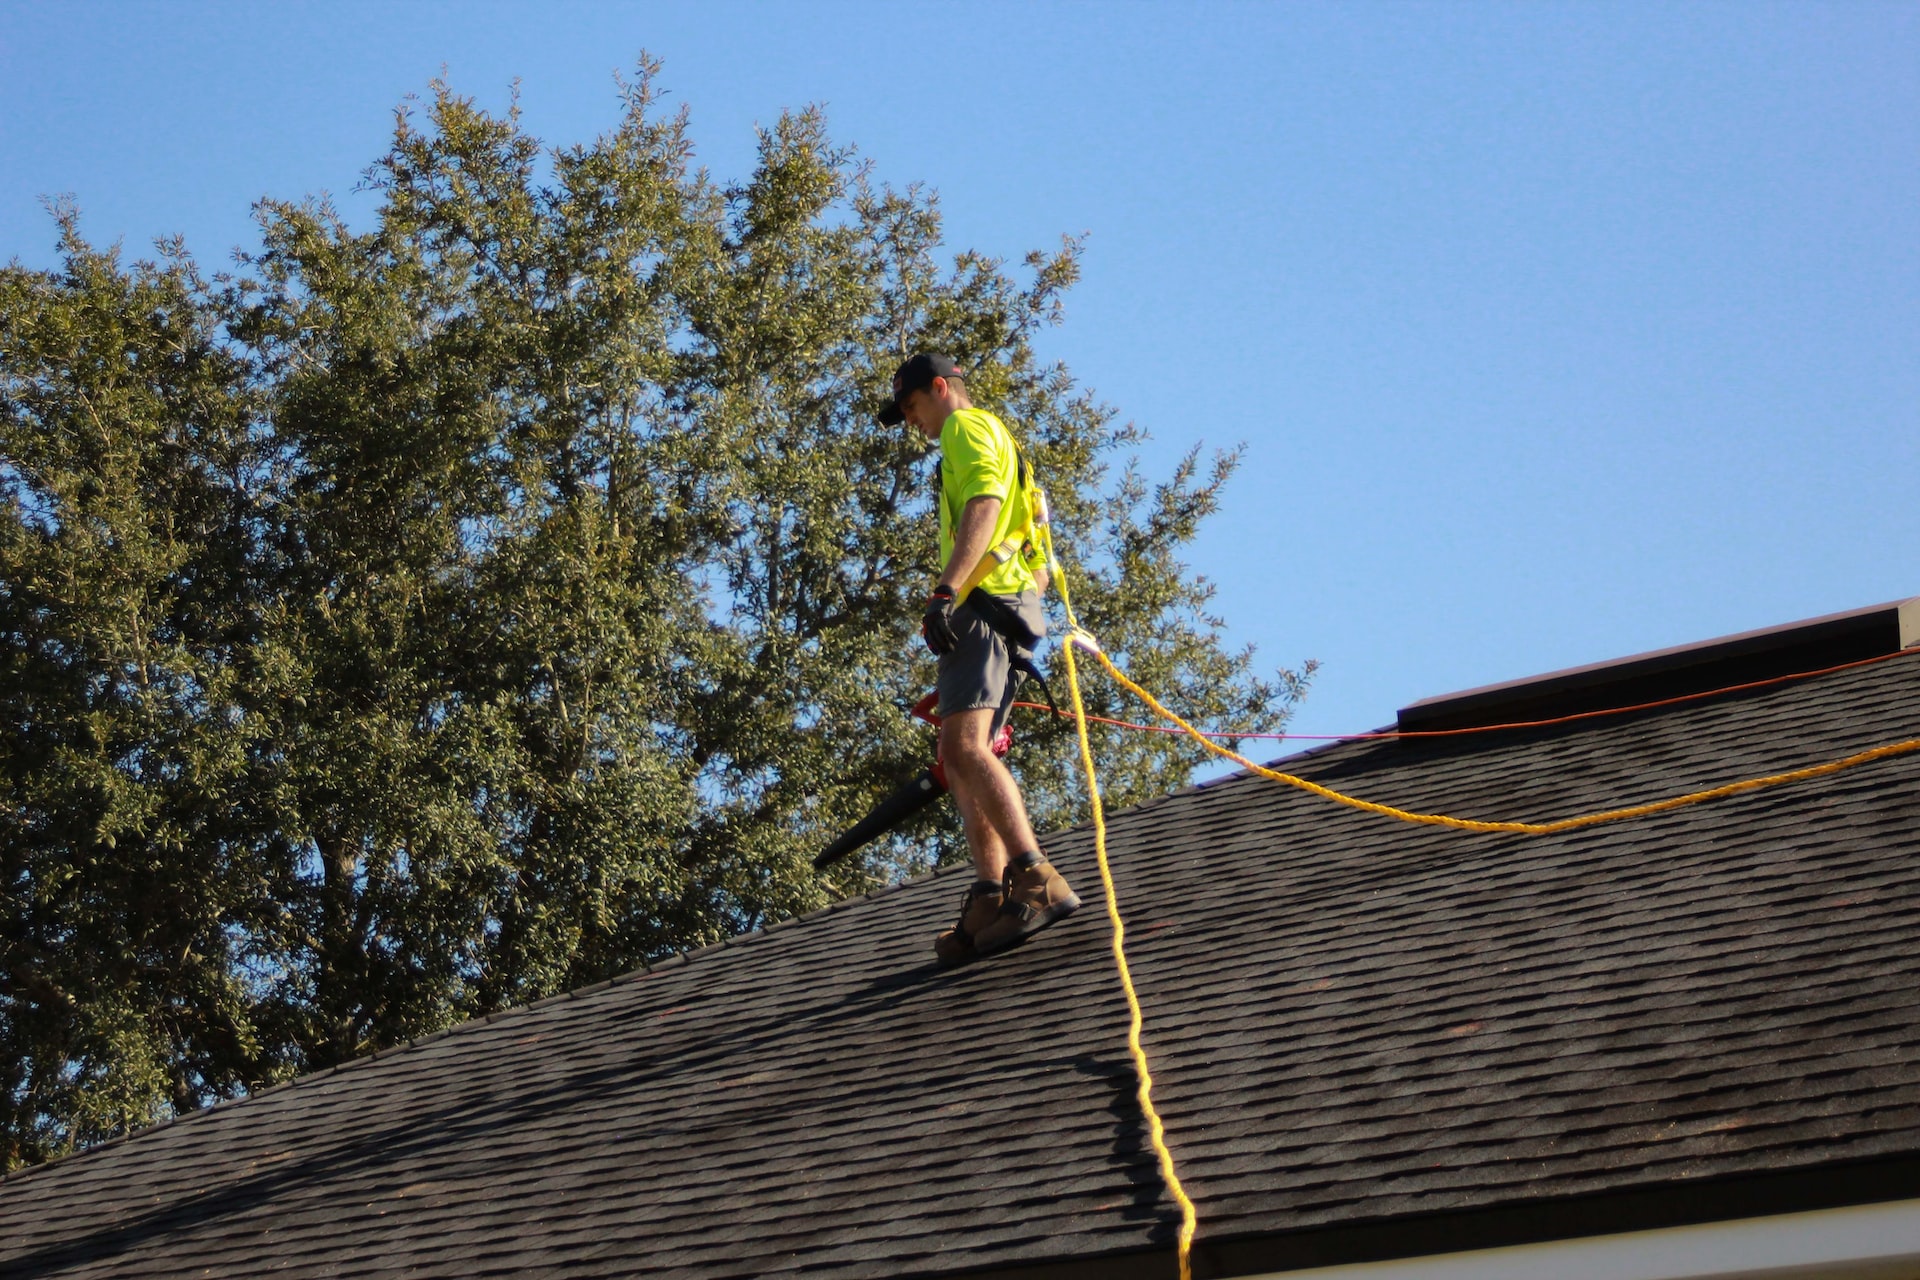 when to replace your roof